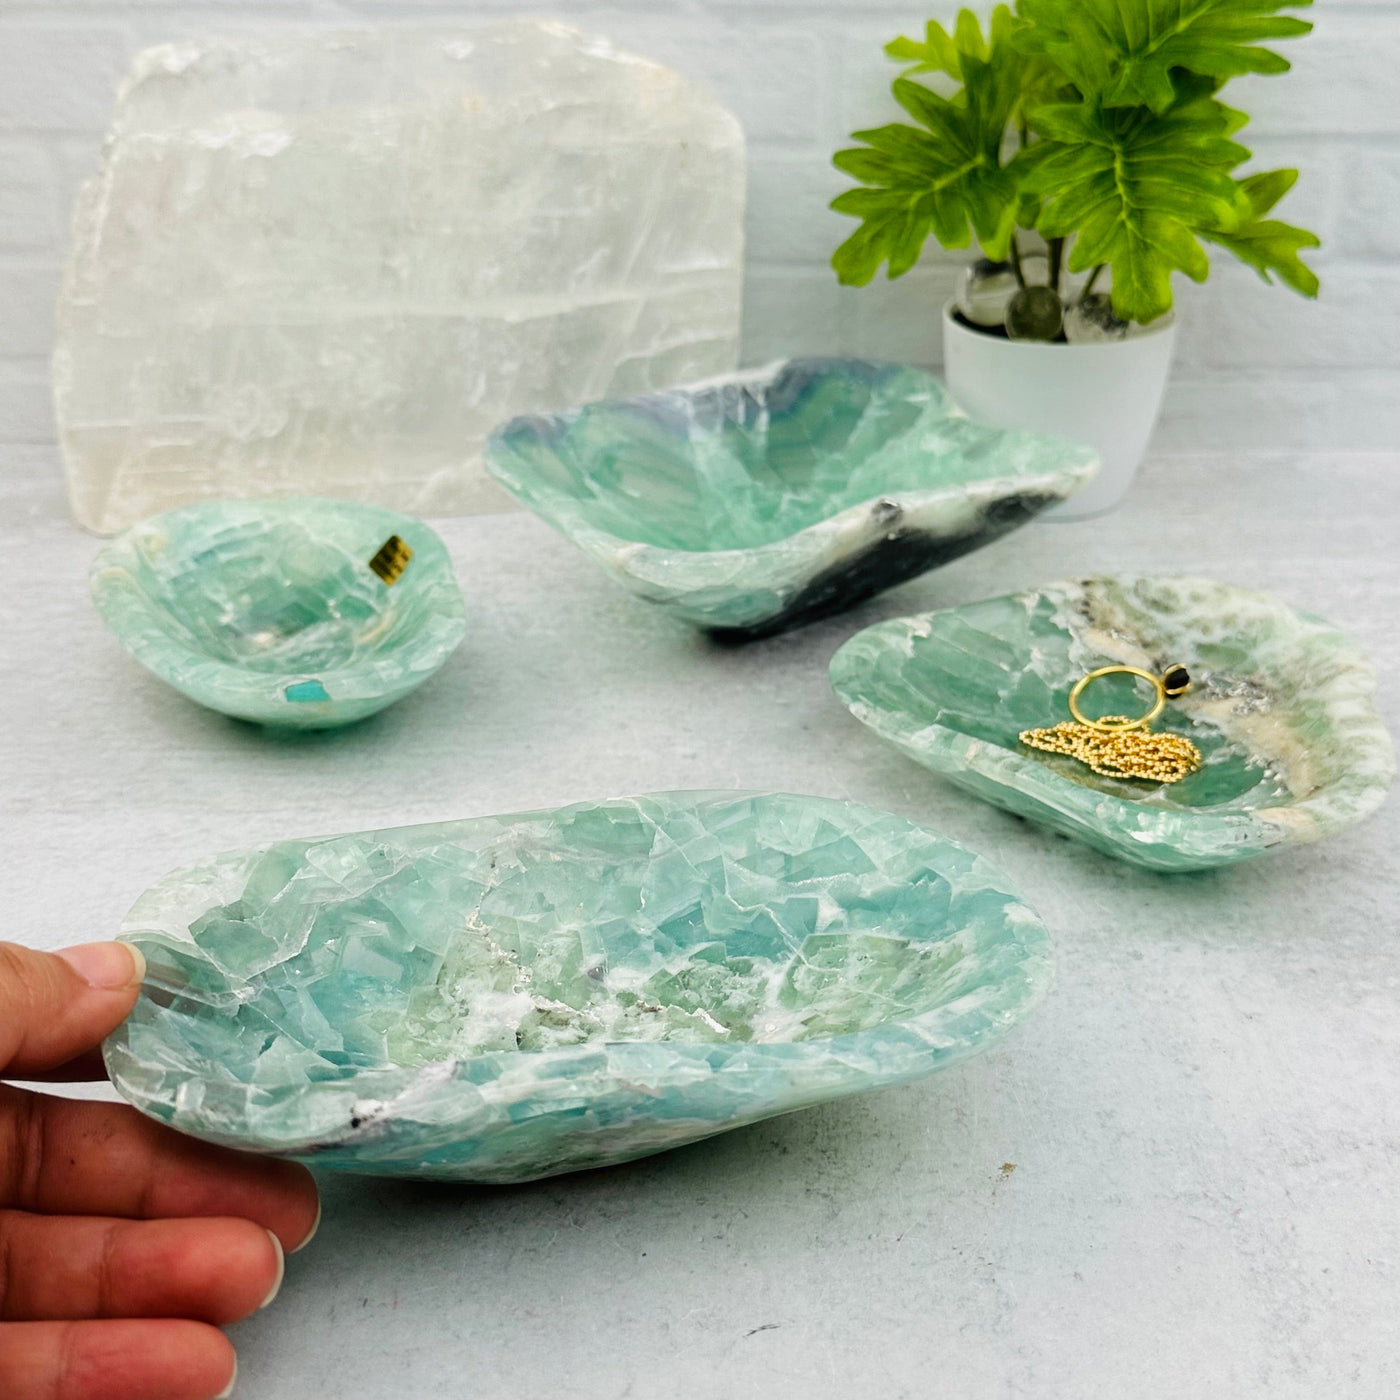 Fluorite Polished Bowl from Mexico next to hand for size reference 